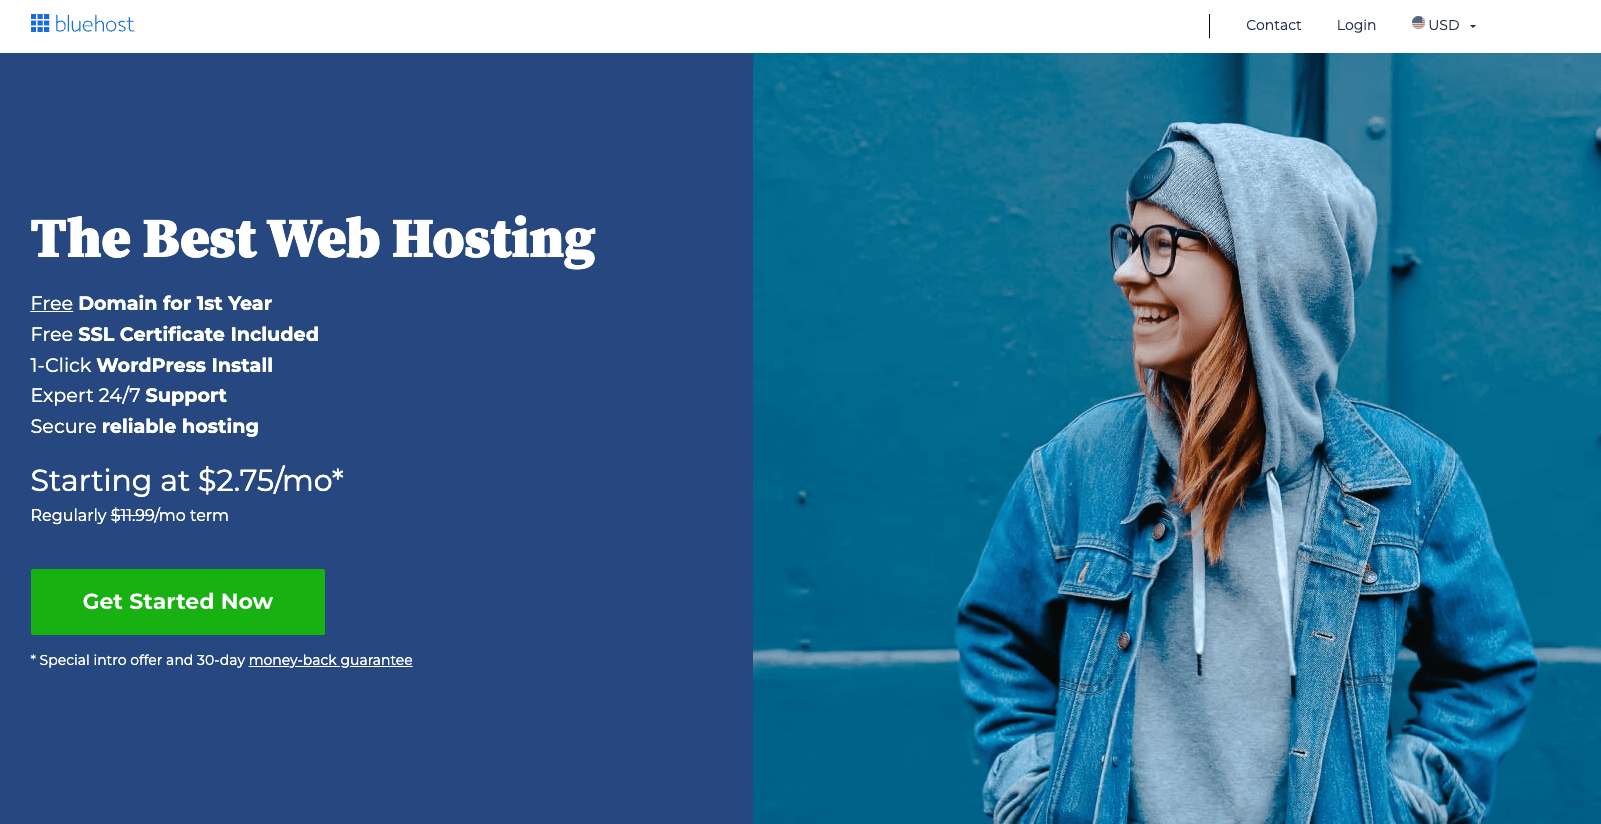 You can get a free email domain with a Bluehost hosting plan. 